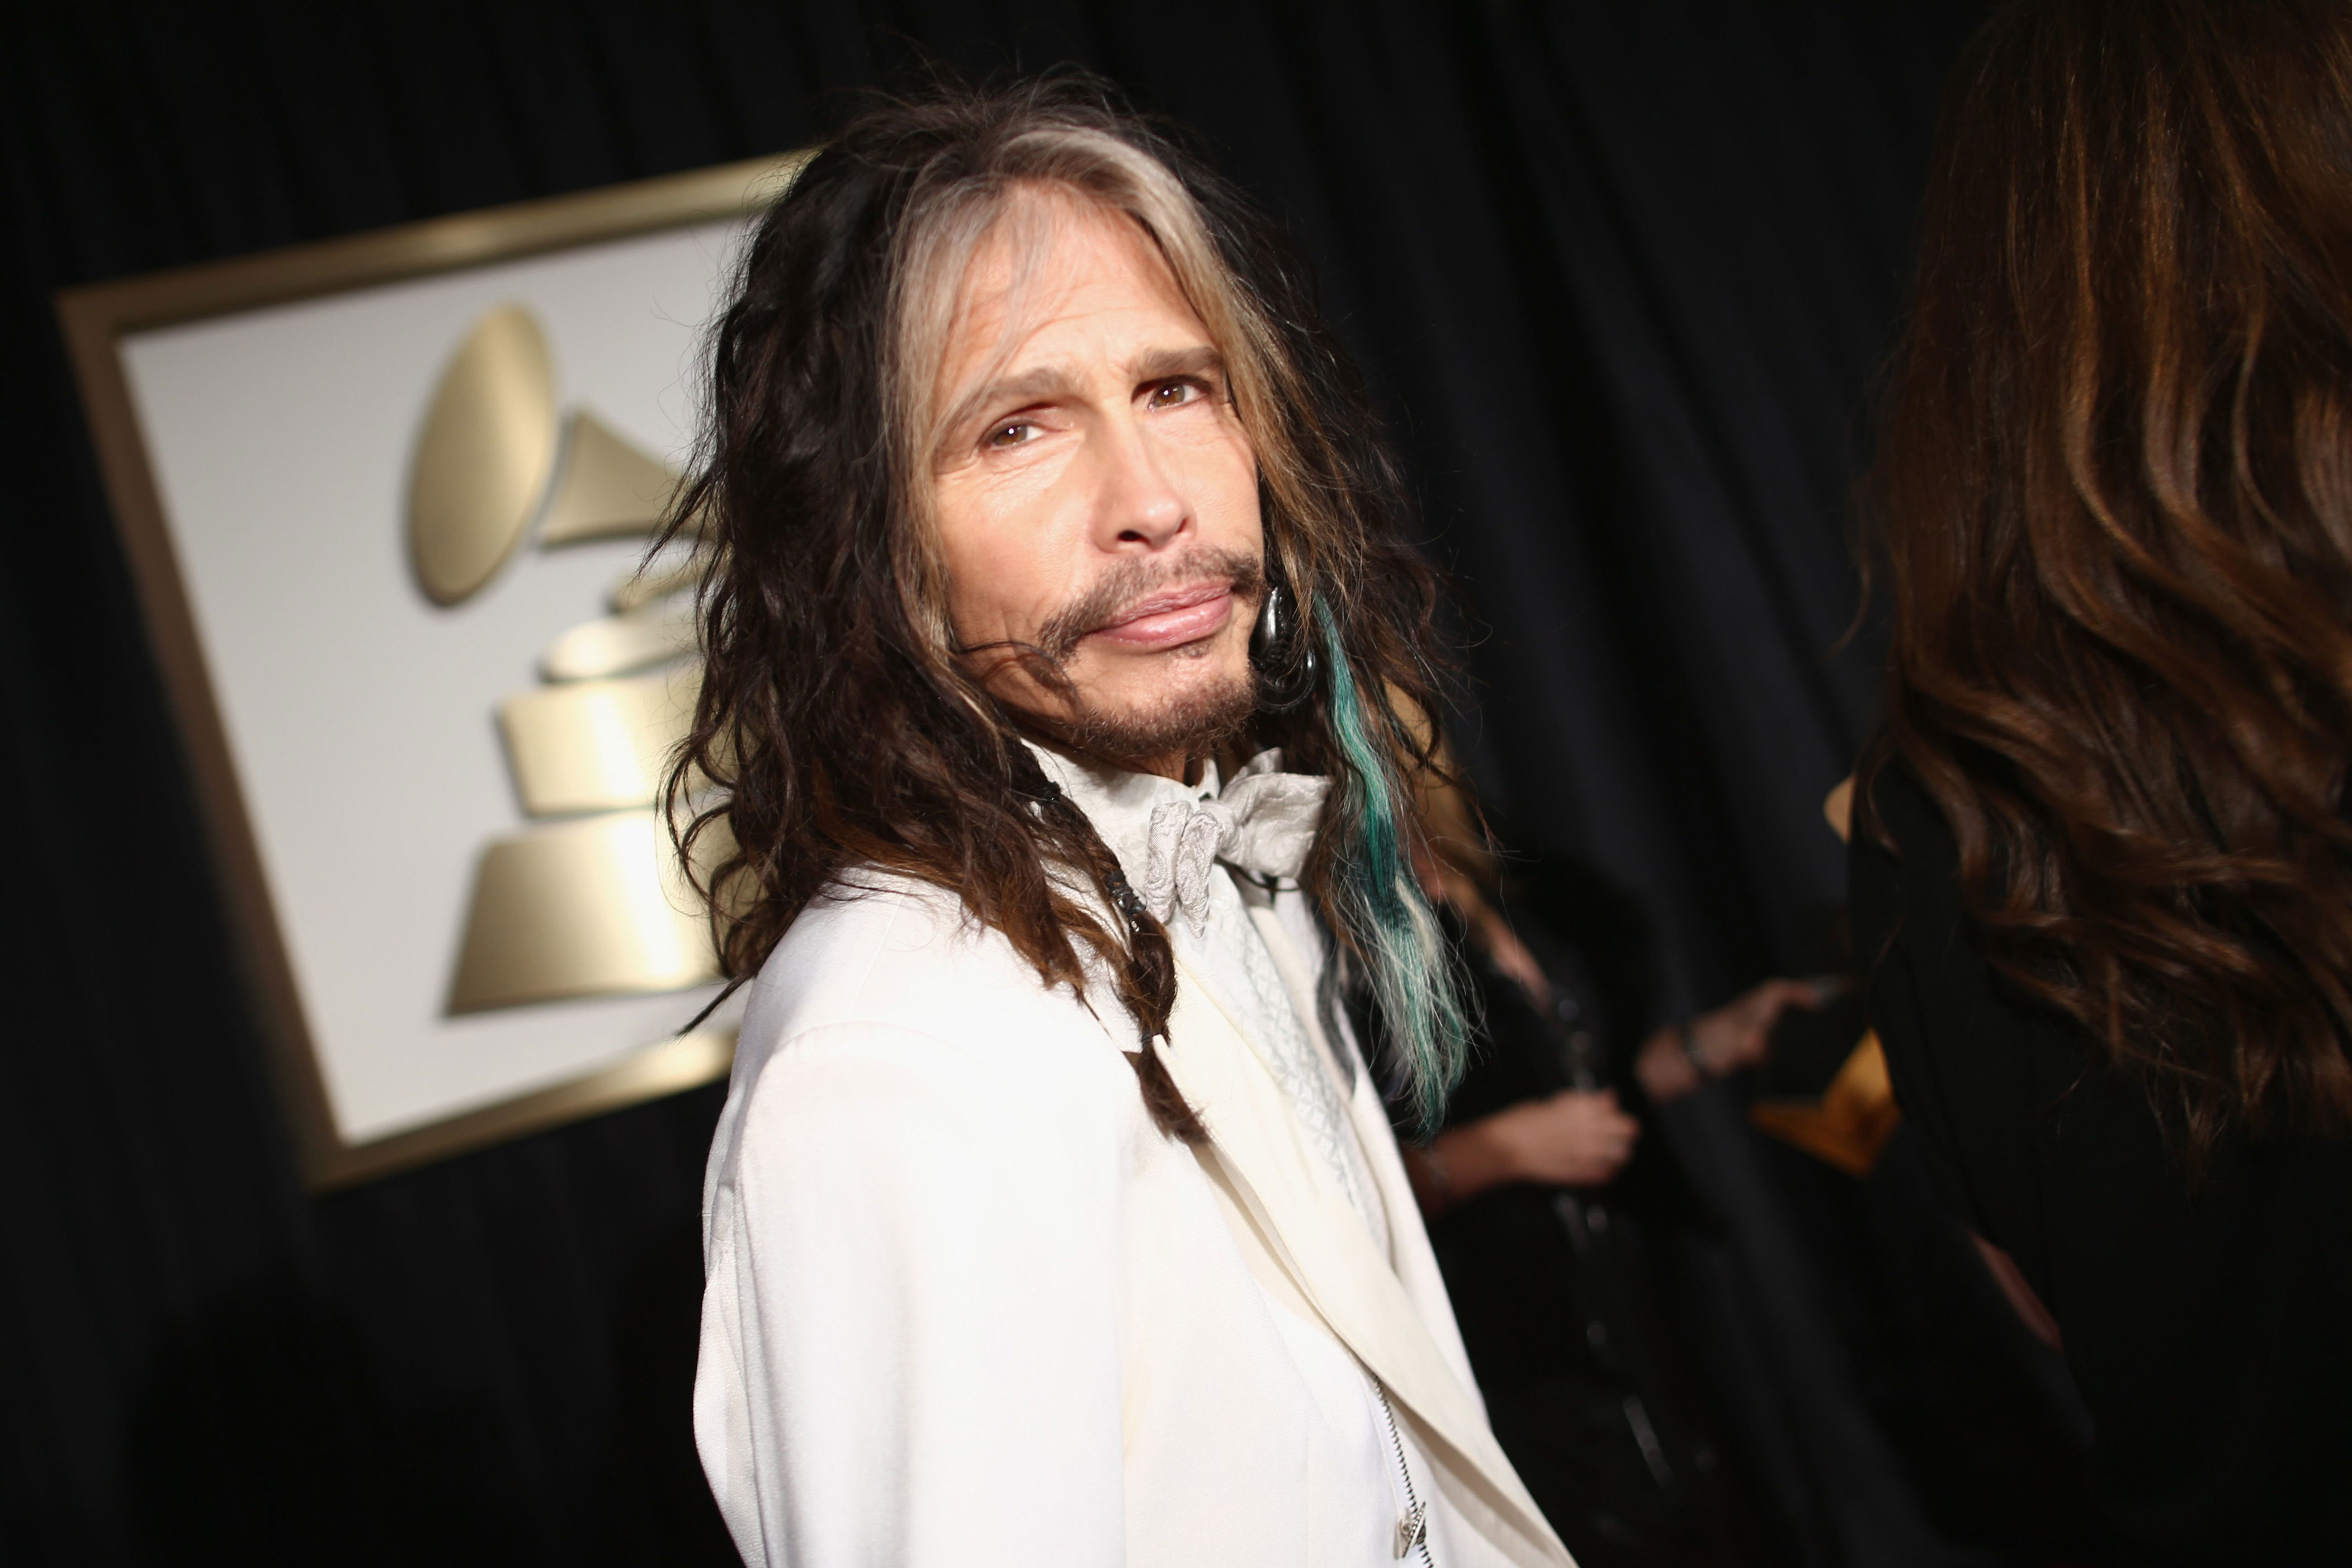 LOS ANGELES, CA - JANUARY 26: Musician Steven Tyler attends the 56th GRAMMY Awards at Staples Center on January 26, 2014 in Los Angeles, California. (Photo by Christopher Polk/Getty Images for NARAS)